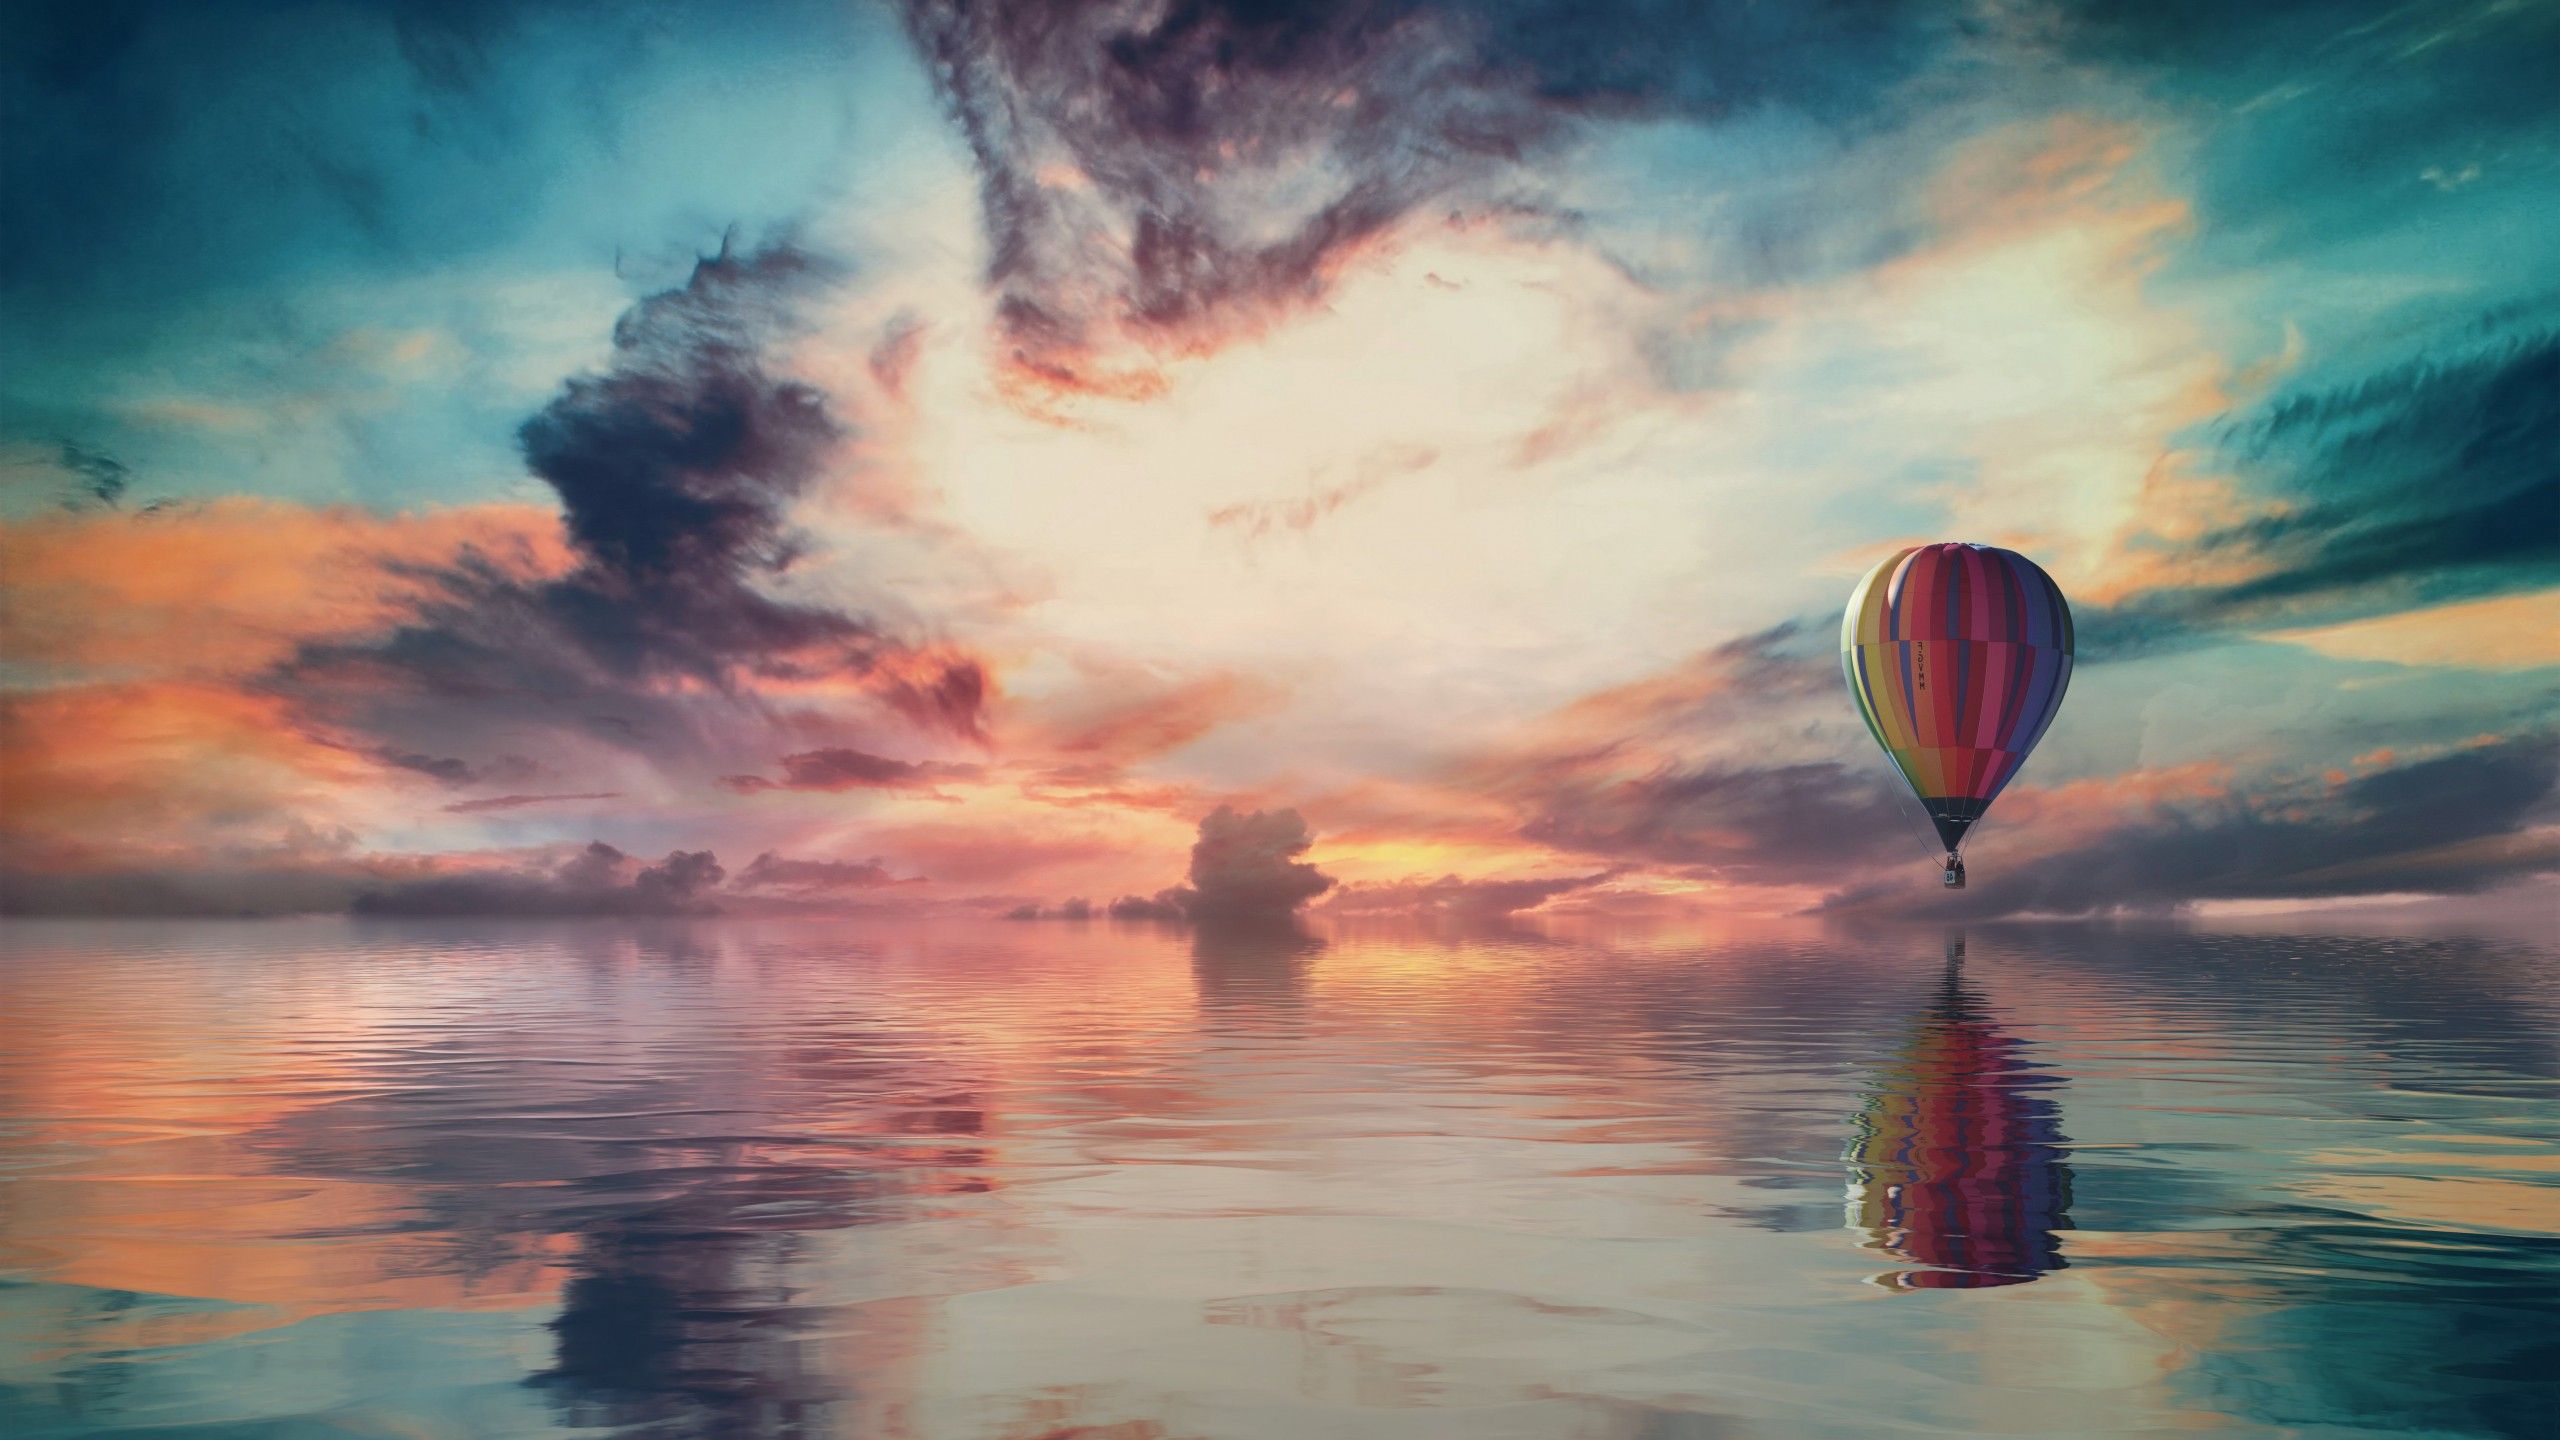 Hot air balloon 4K Wallpaper, Multicolor, Colorful Sky, Water, Reflection, Clouds, Sky view, Aesthetic, Nature